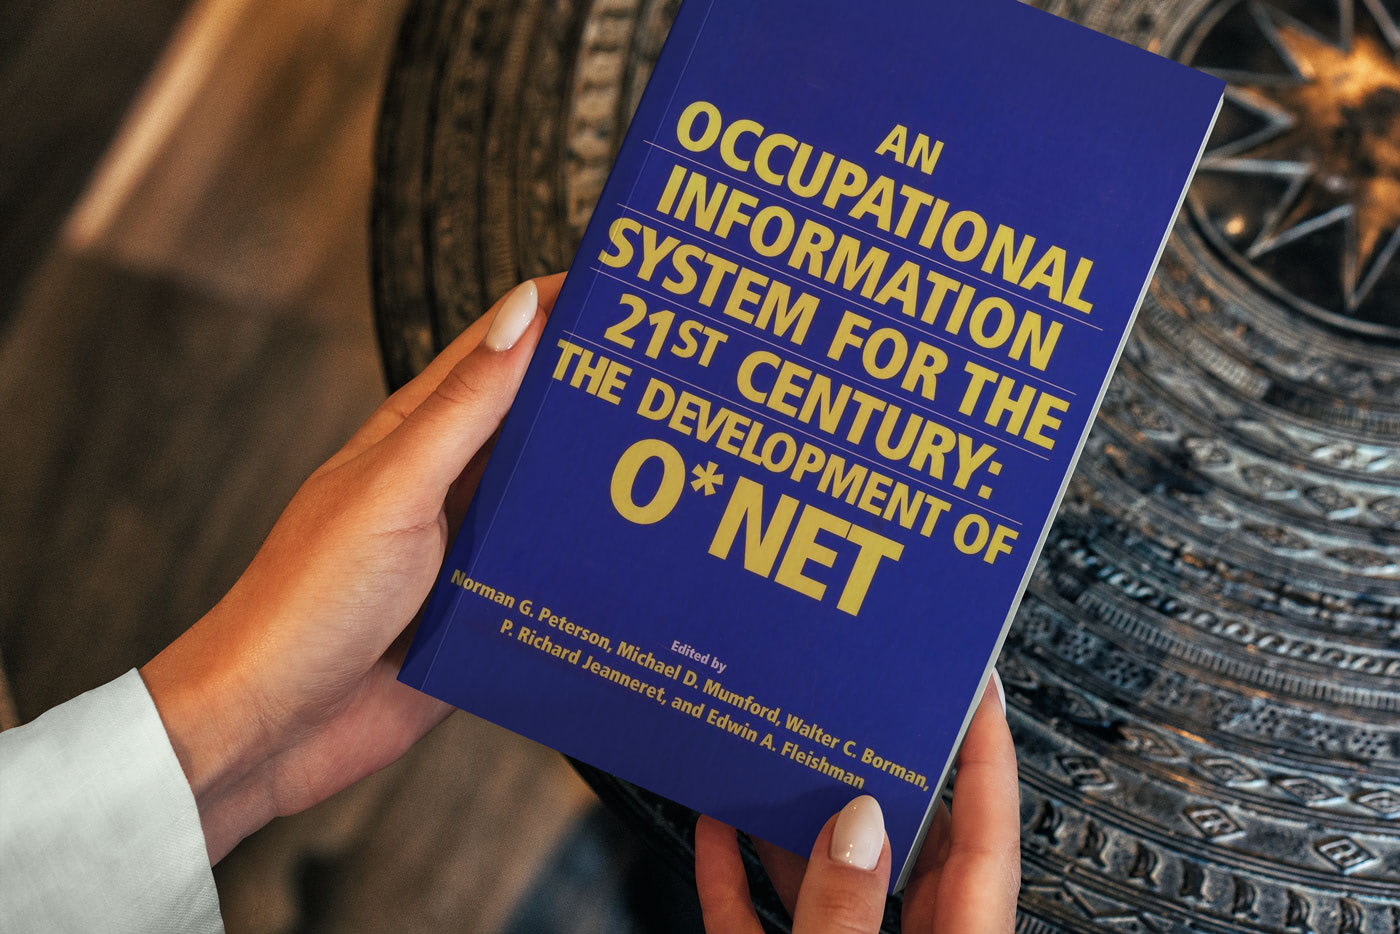 An Occupational Information System for the 21st Century: The Development of O*Net